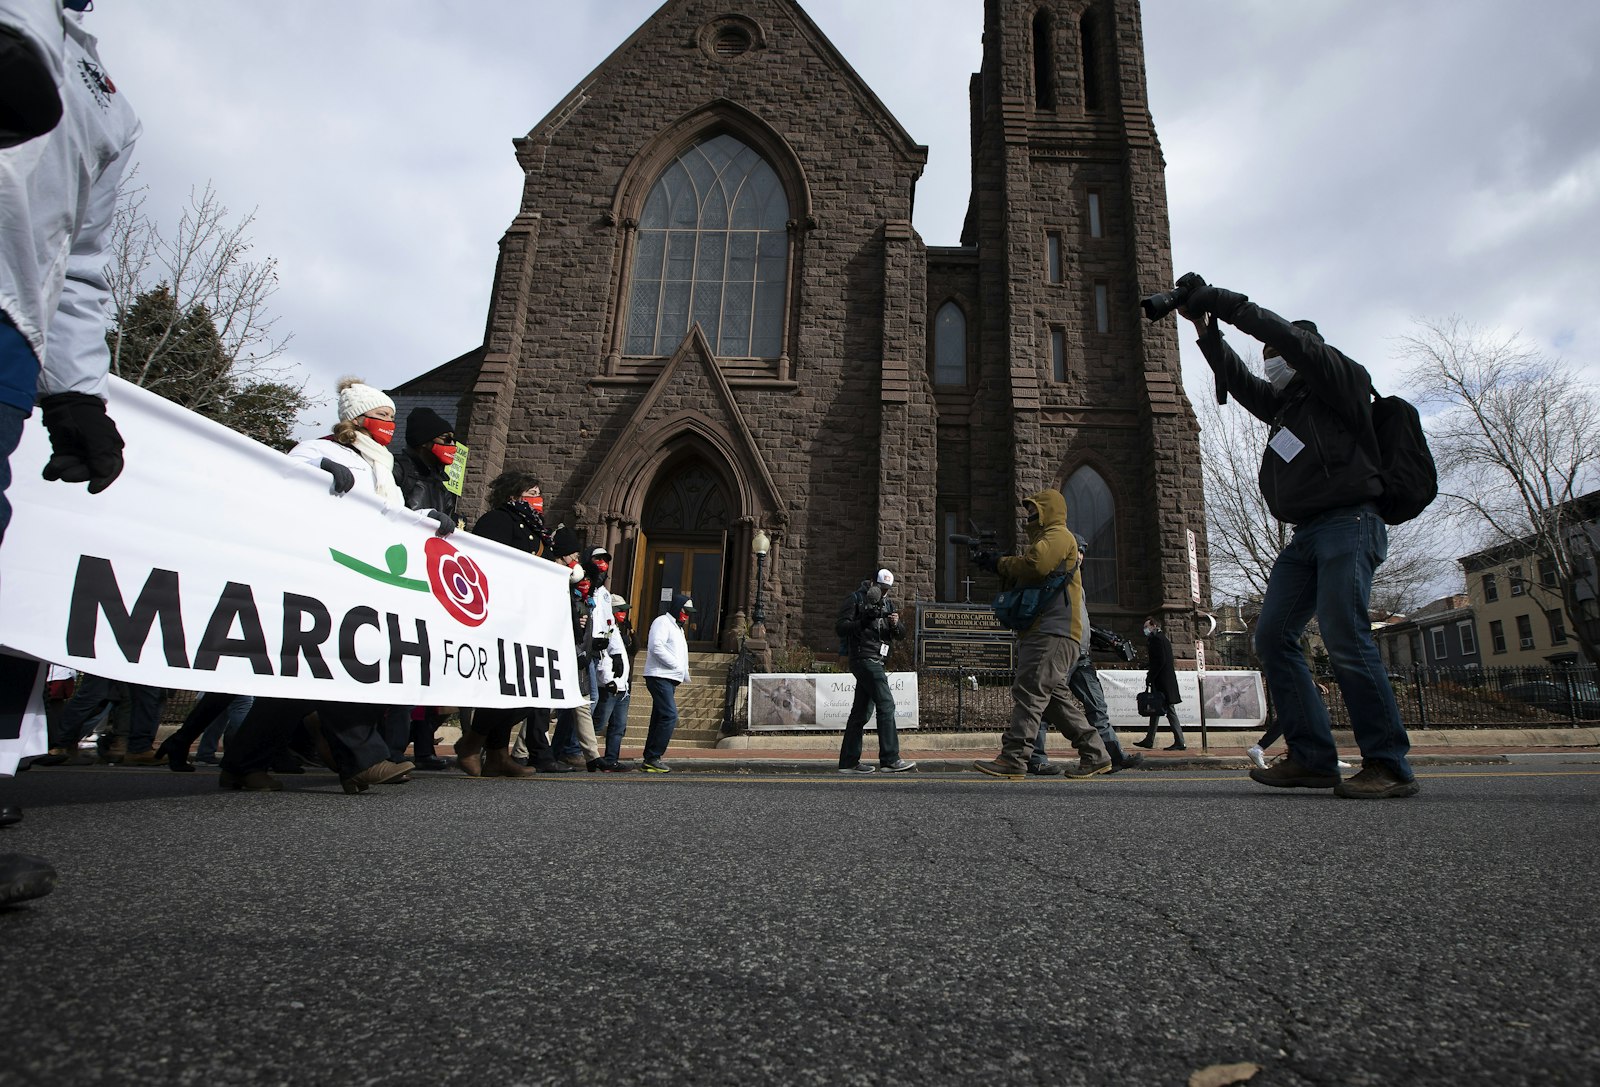 March for Life participants walk past St. Joseph's on Capitol Hill Church on their way to the U.S. Supreme Court building in Washington Jan. 29, 2021, amid the coronavirus pandemic. (CNS photo/Tyler Orsburn)